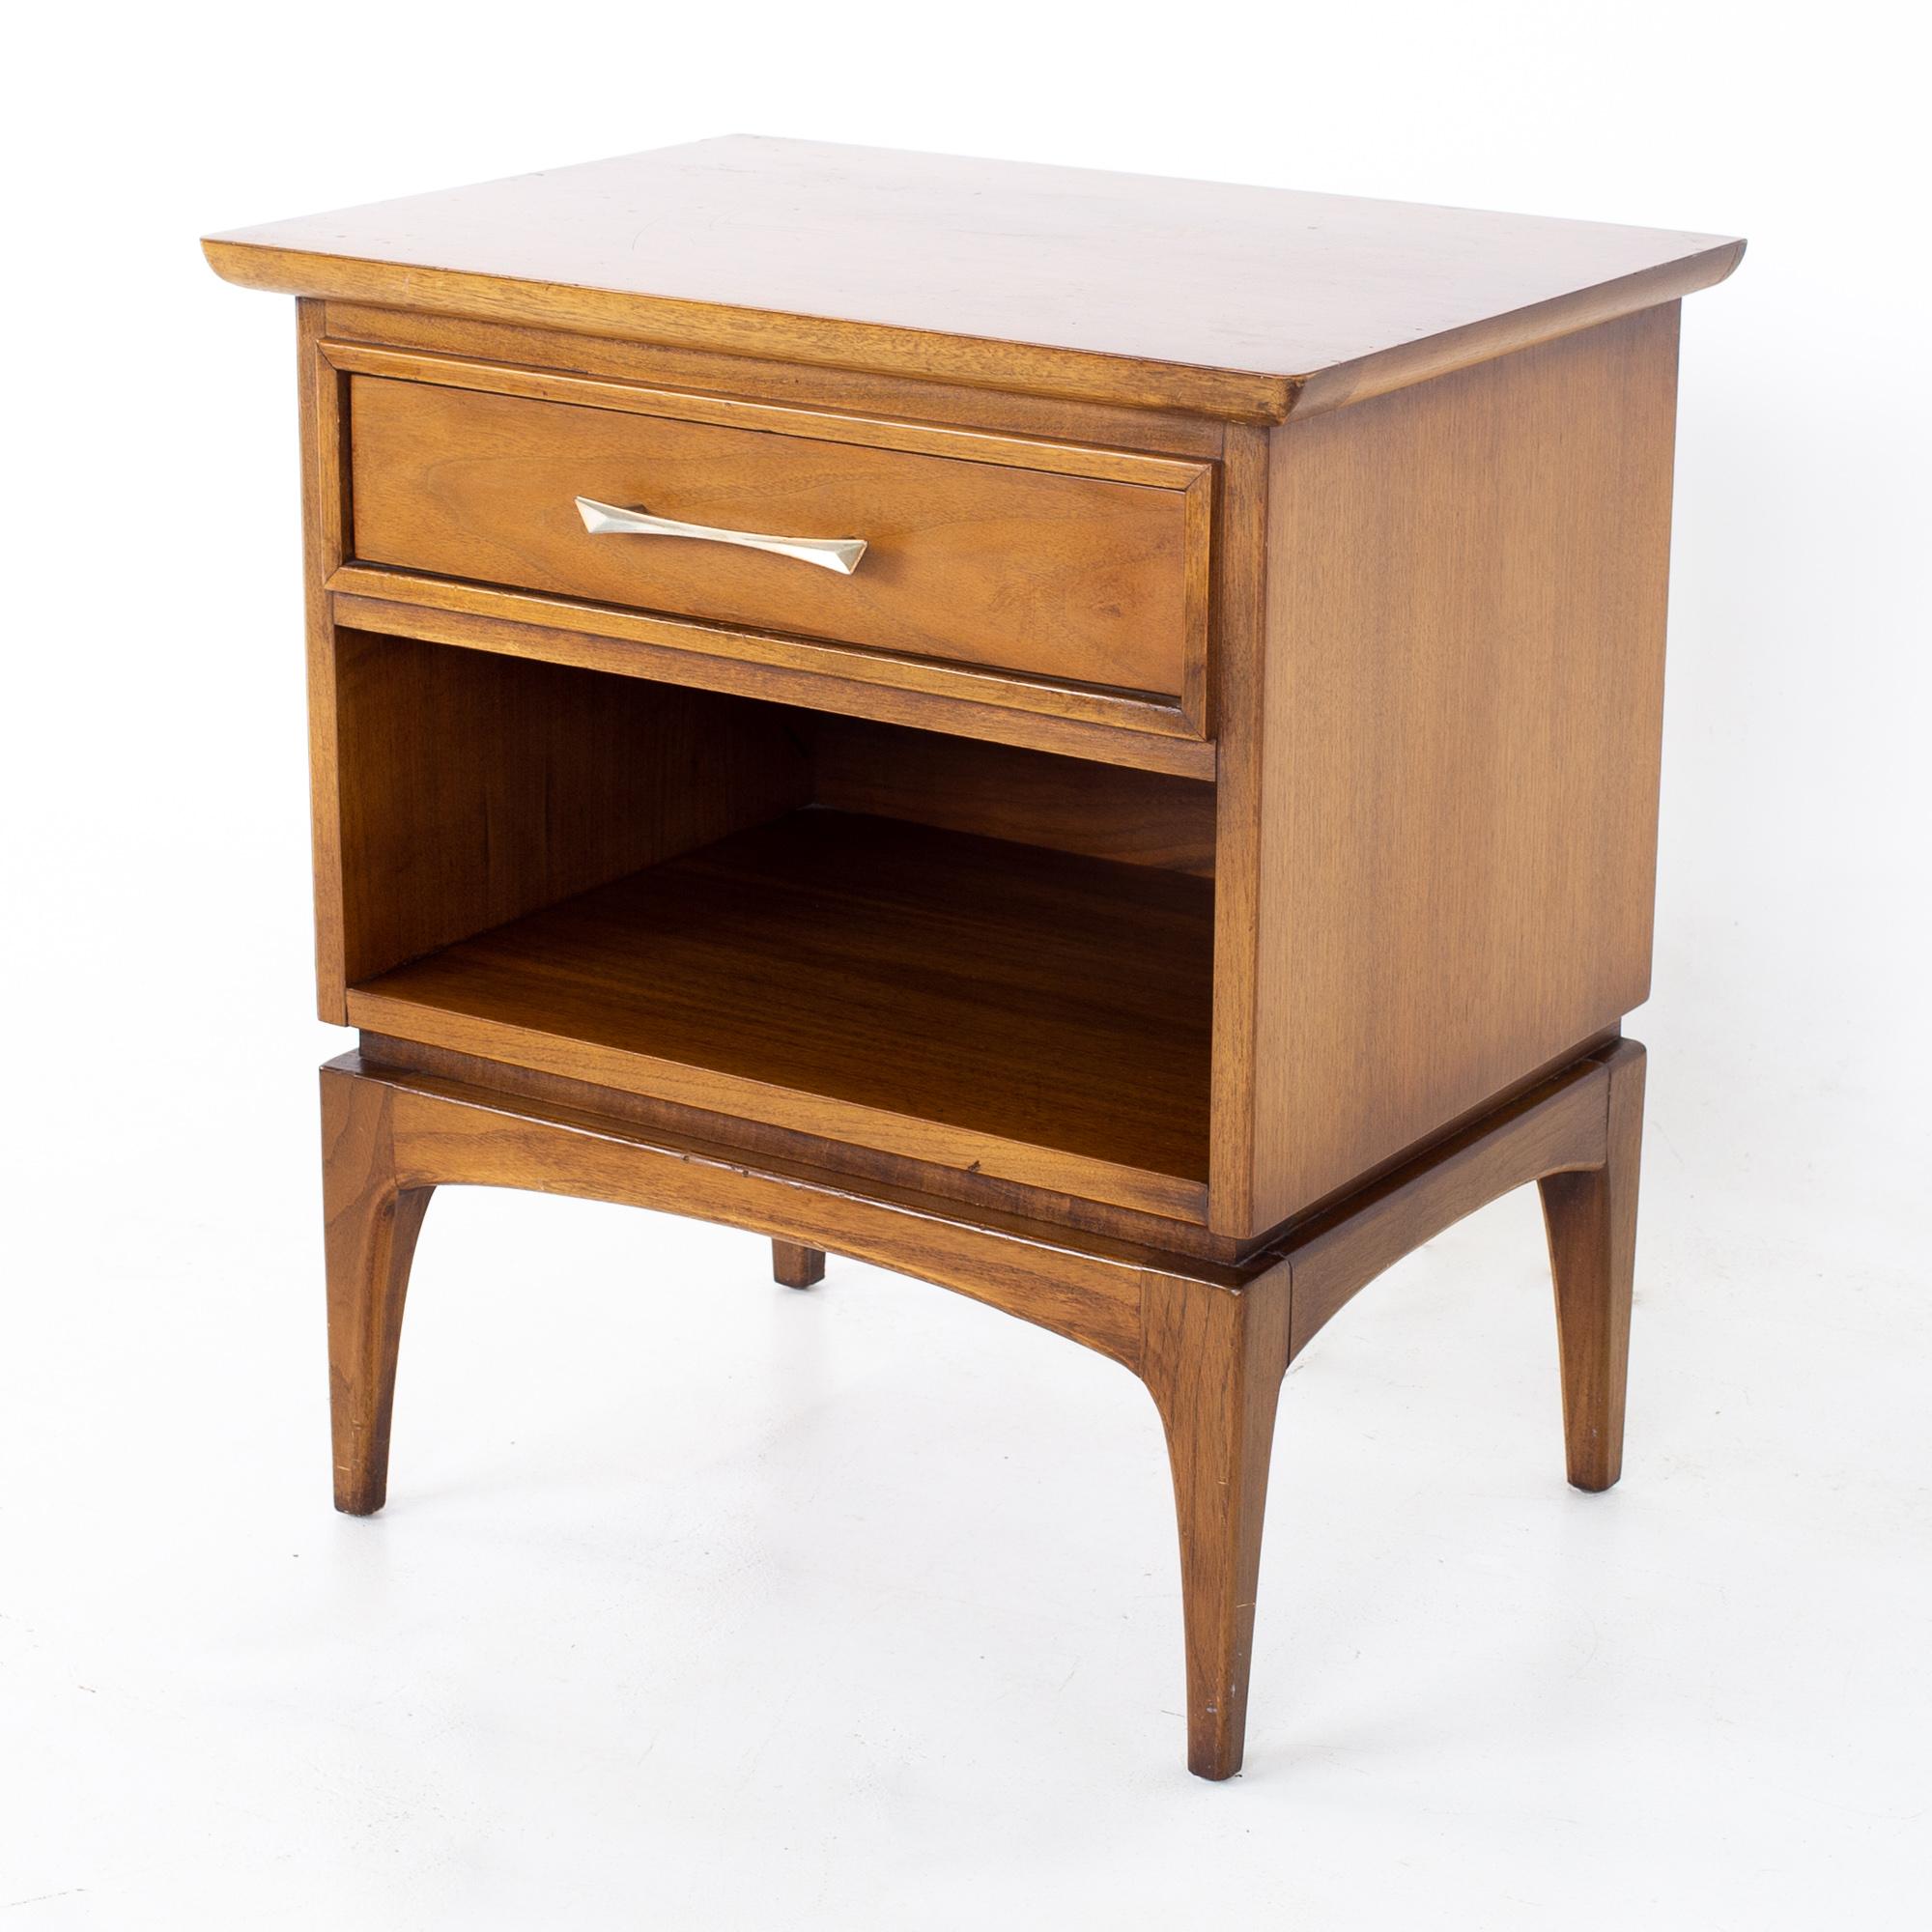 Kent Coffey the wharton mid century walnut nightstand
Nightstand measures: 23 wide x 17 deep x 25.25 inches high

All pieces of furniture can be had in what we call restored vintage condition. That means the piece is restored upon purchase so